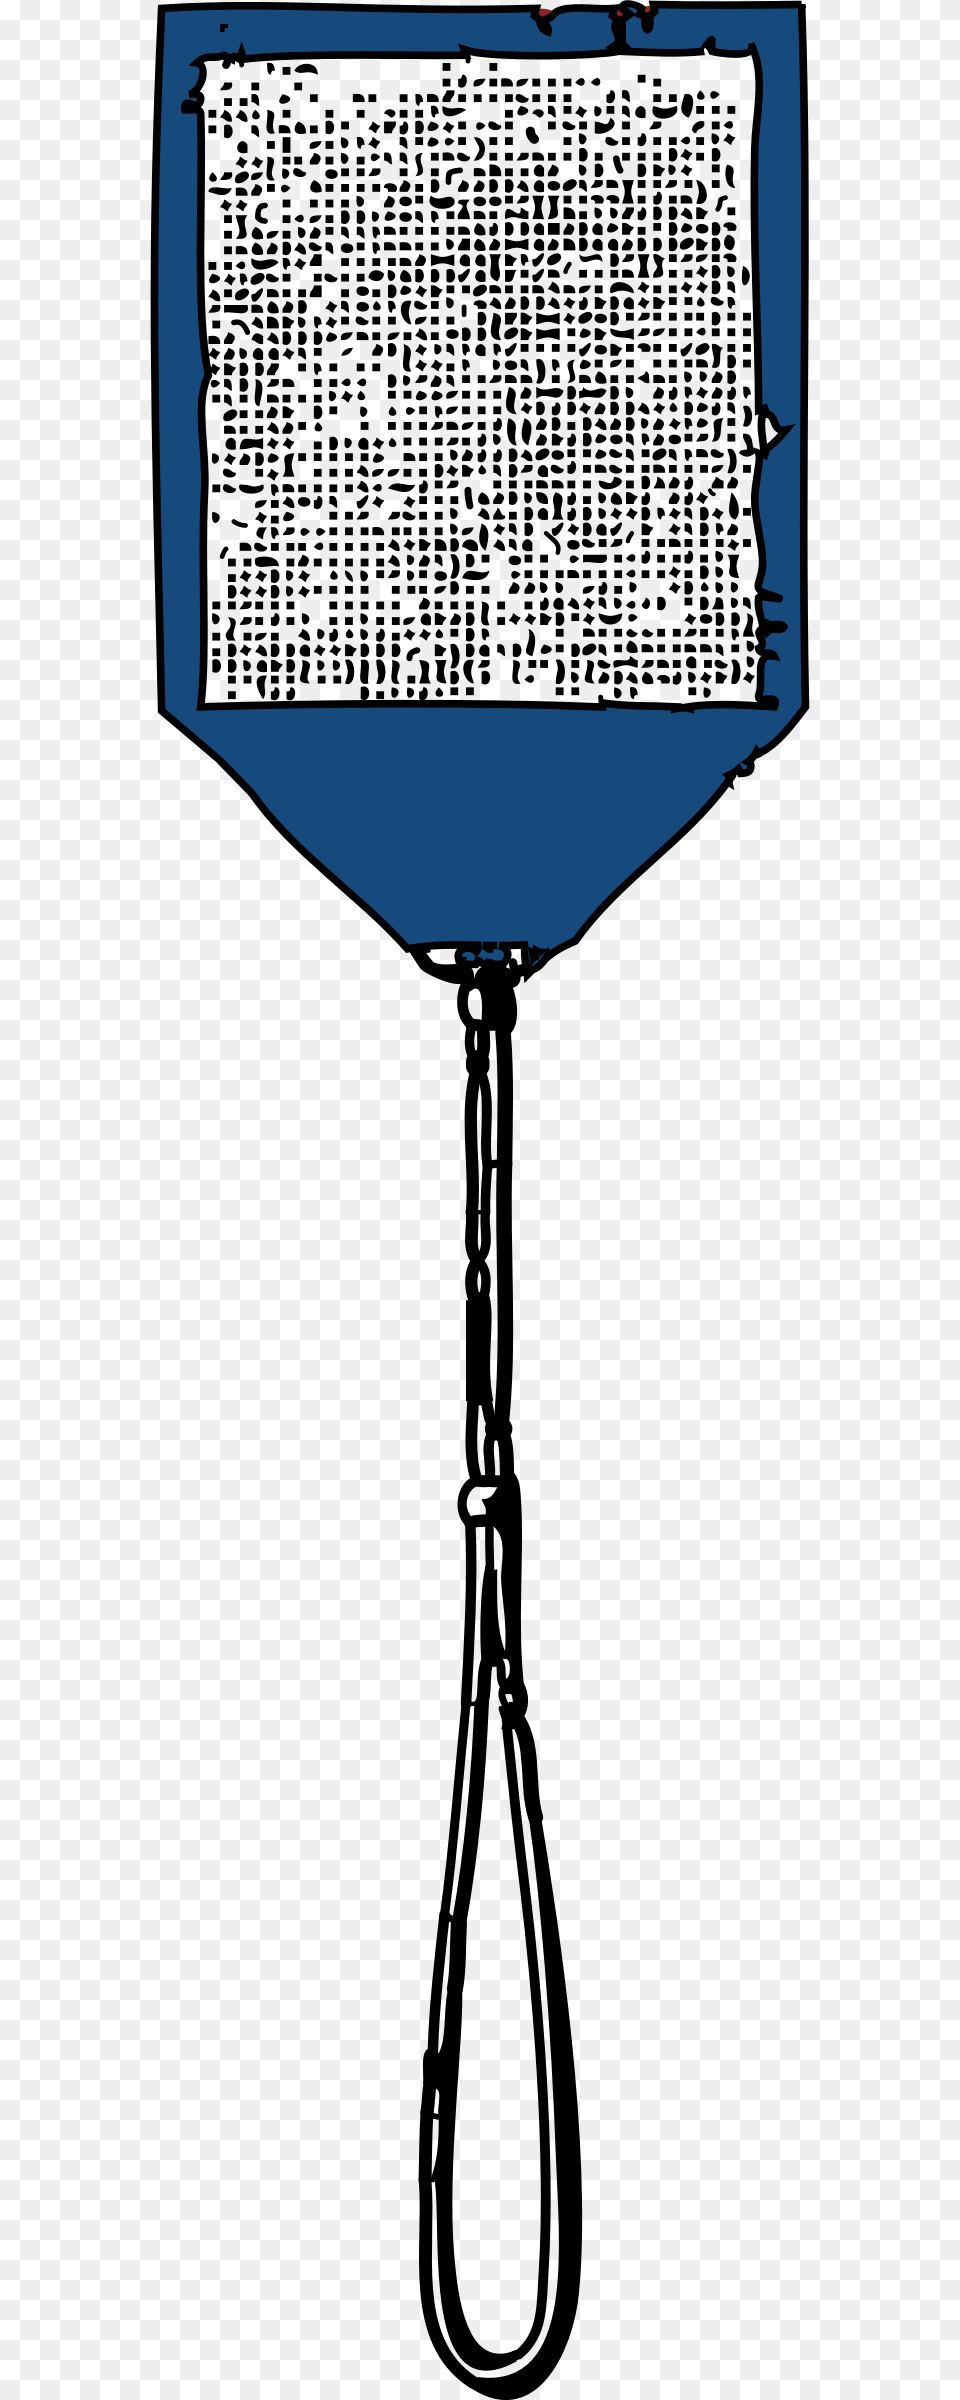 Fly Swatter Pest Control Swat Flyswatter, Silhouette, Nature, Outdoors, Bag Free Transparent Png